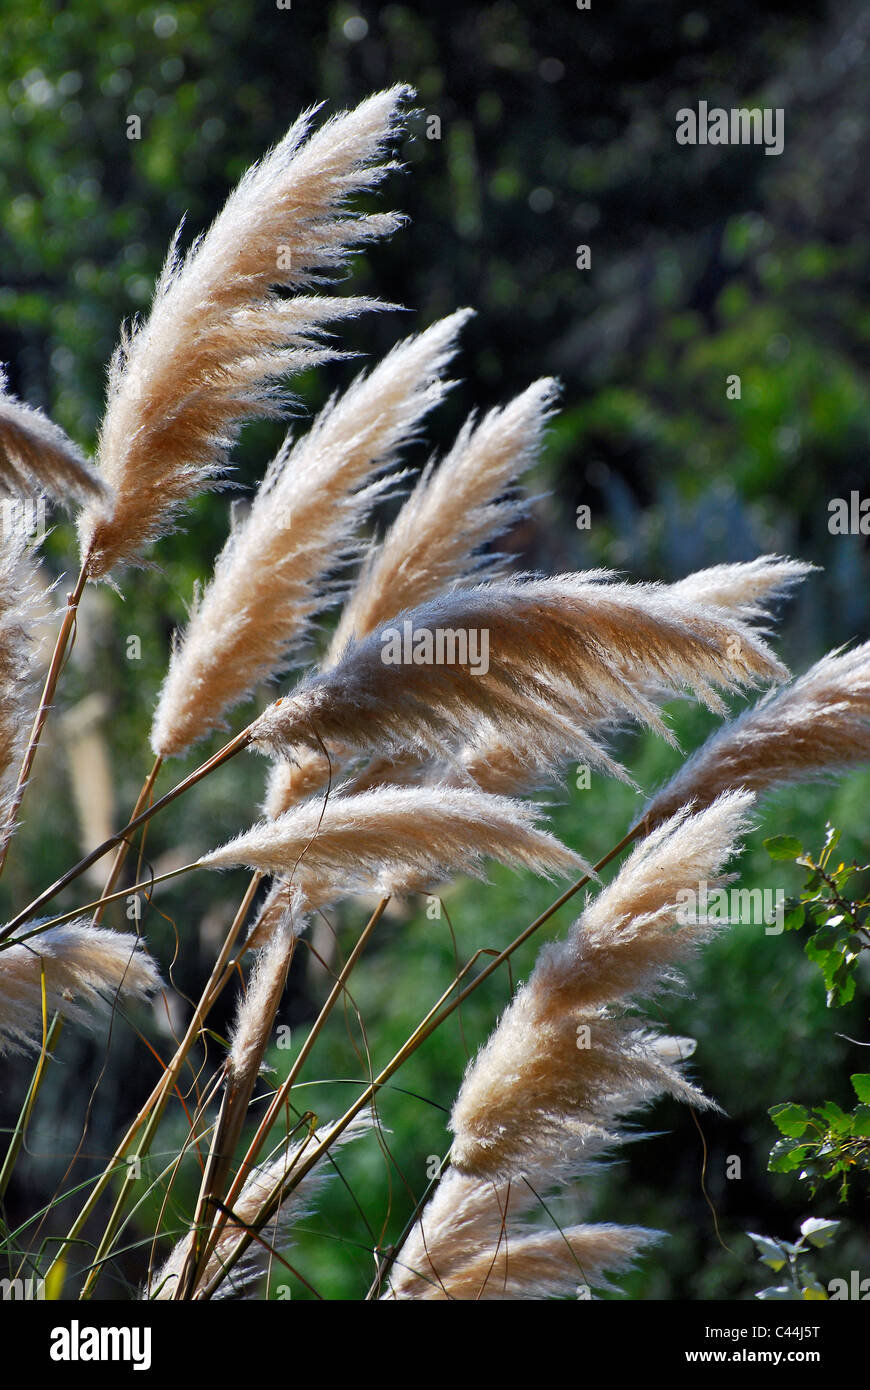 Miscanthus Chinese silver grass, Elephant grass Stock Photo